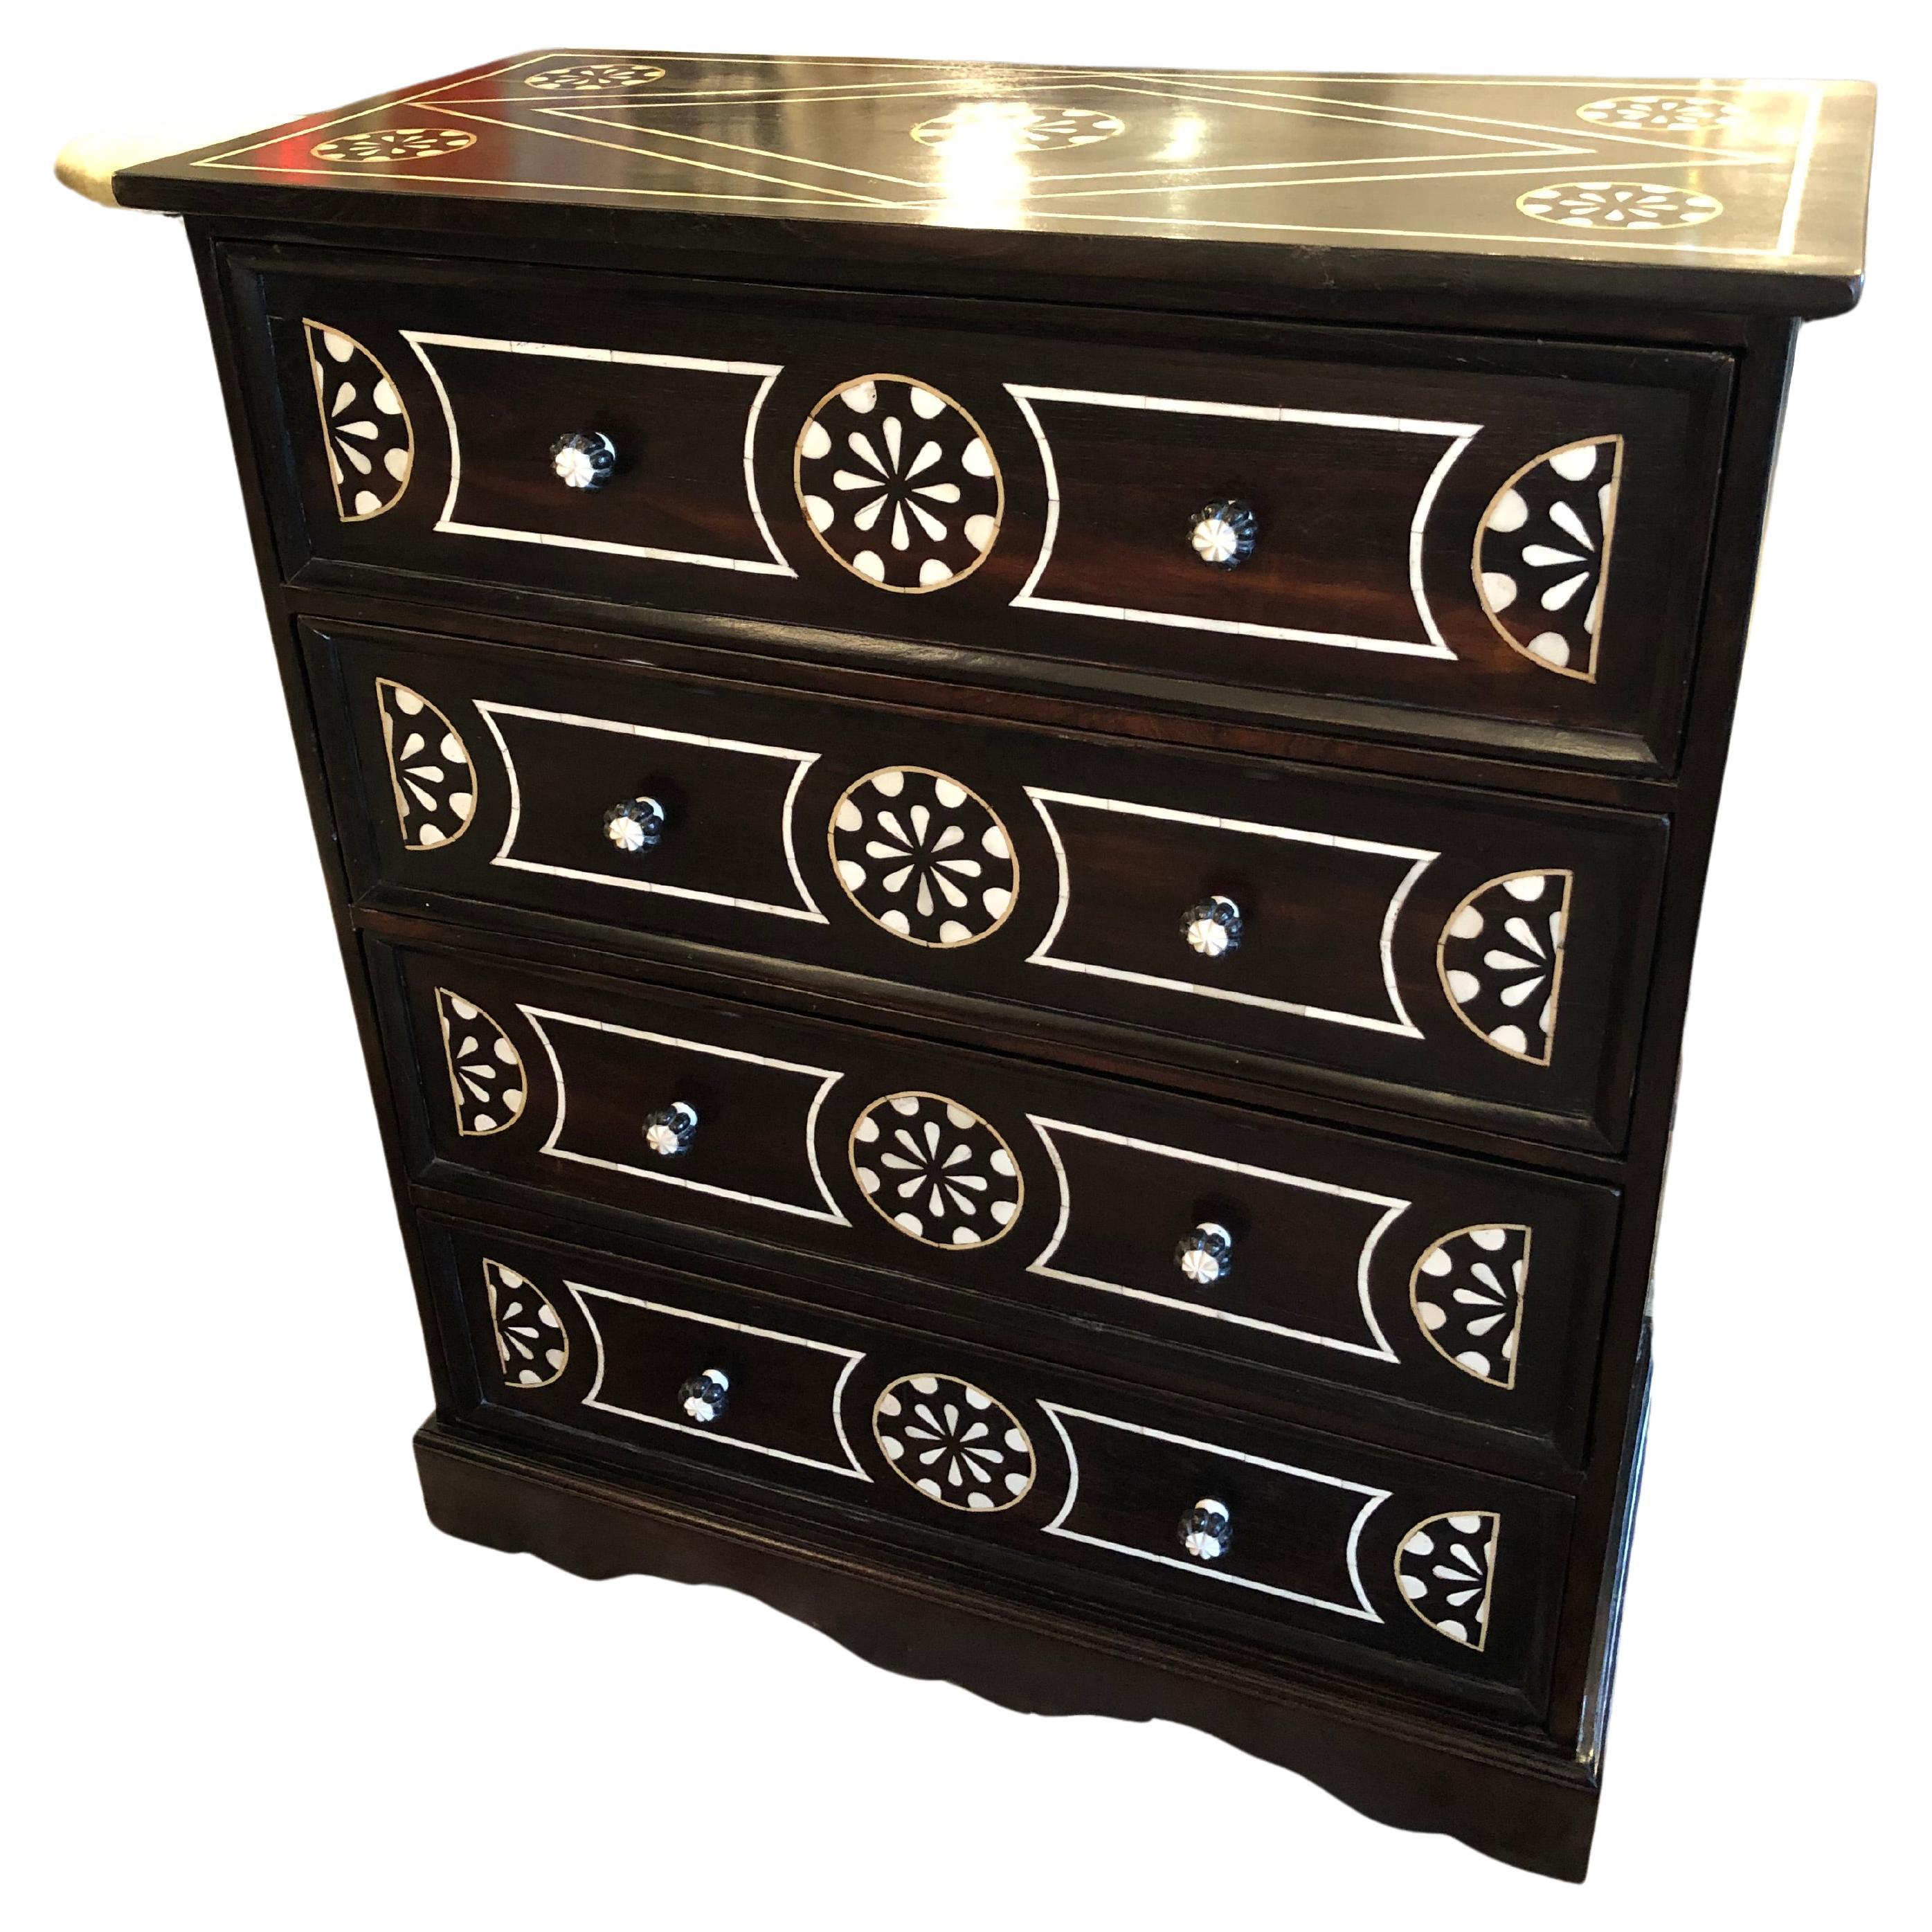 Strikingly Beautiful Vintage Black and White Inlaid Chest of Drawers For Sale